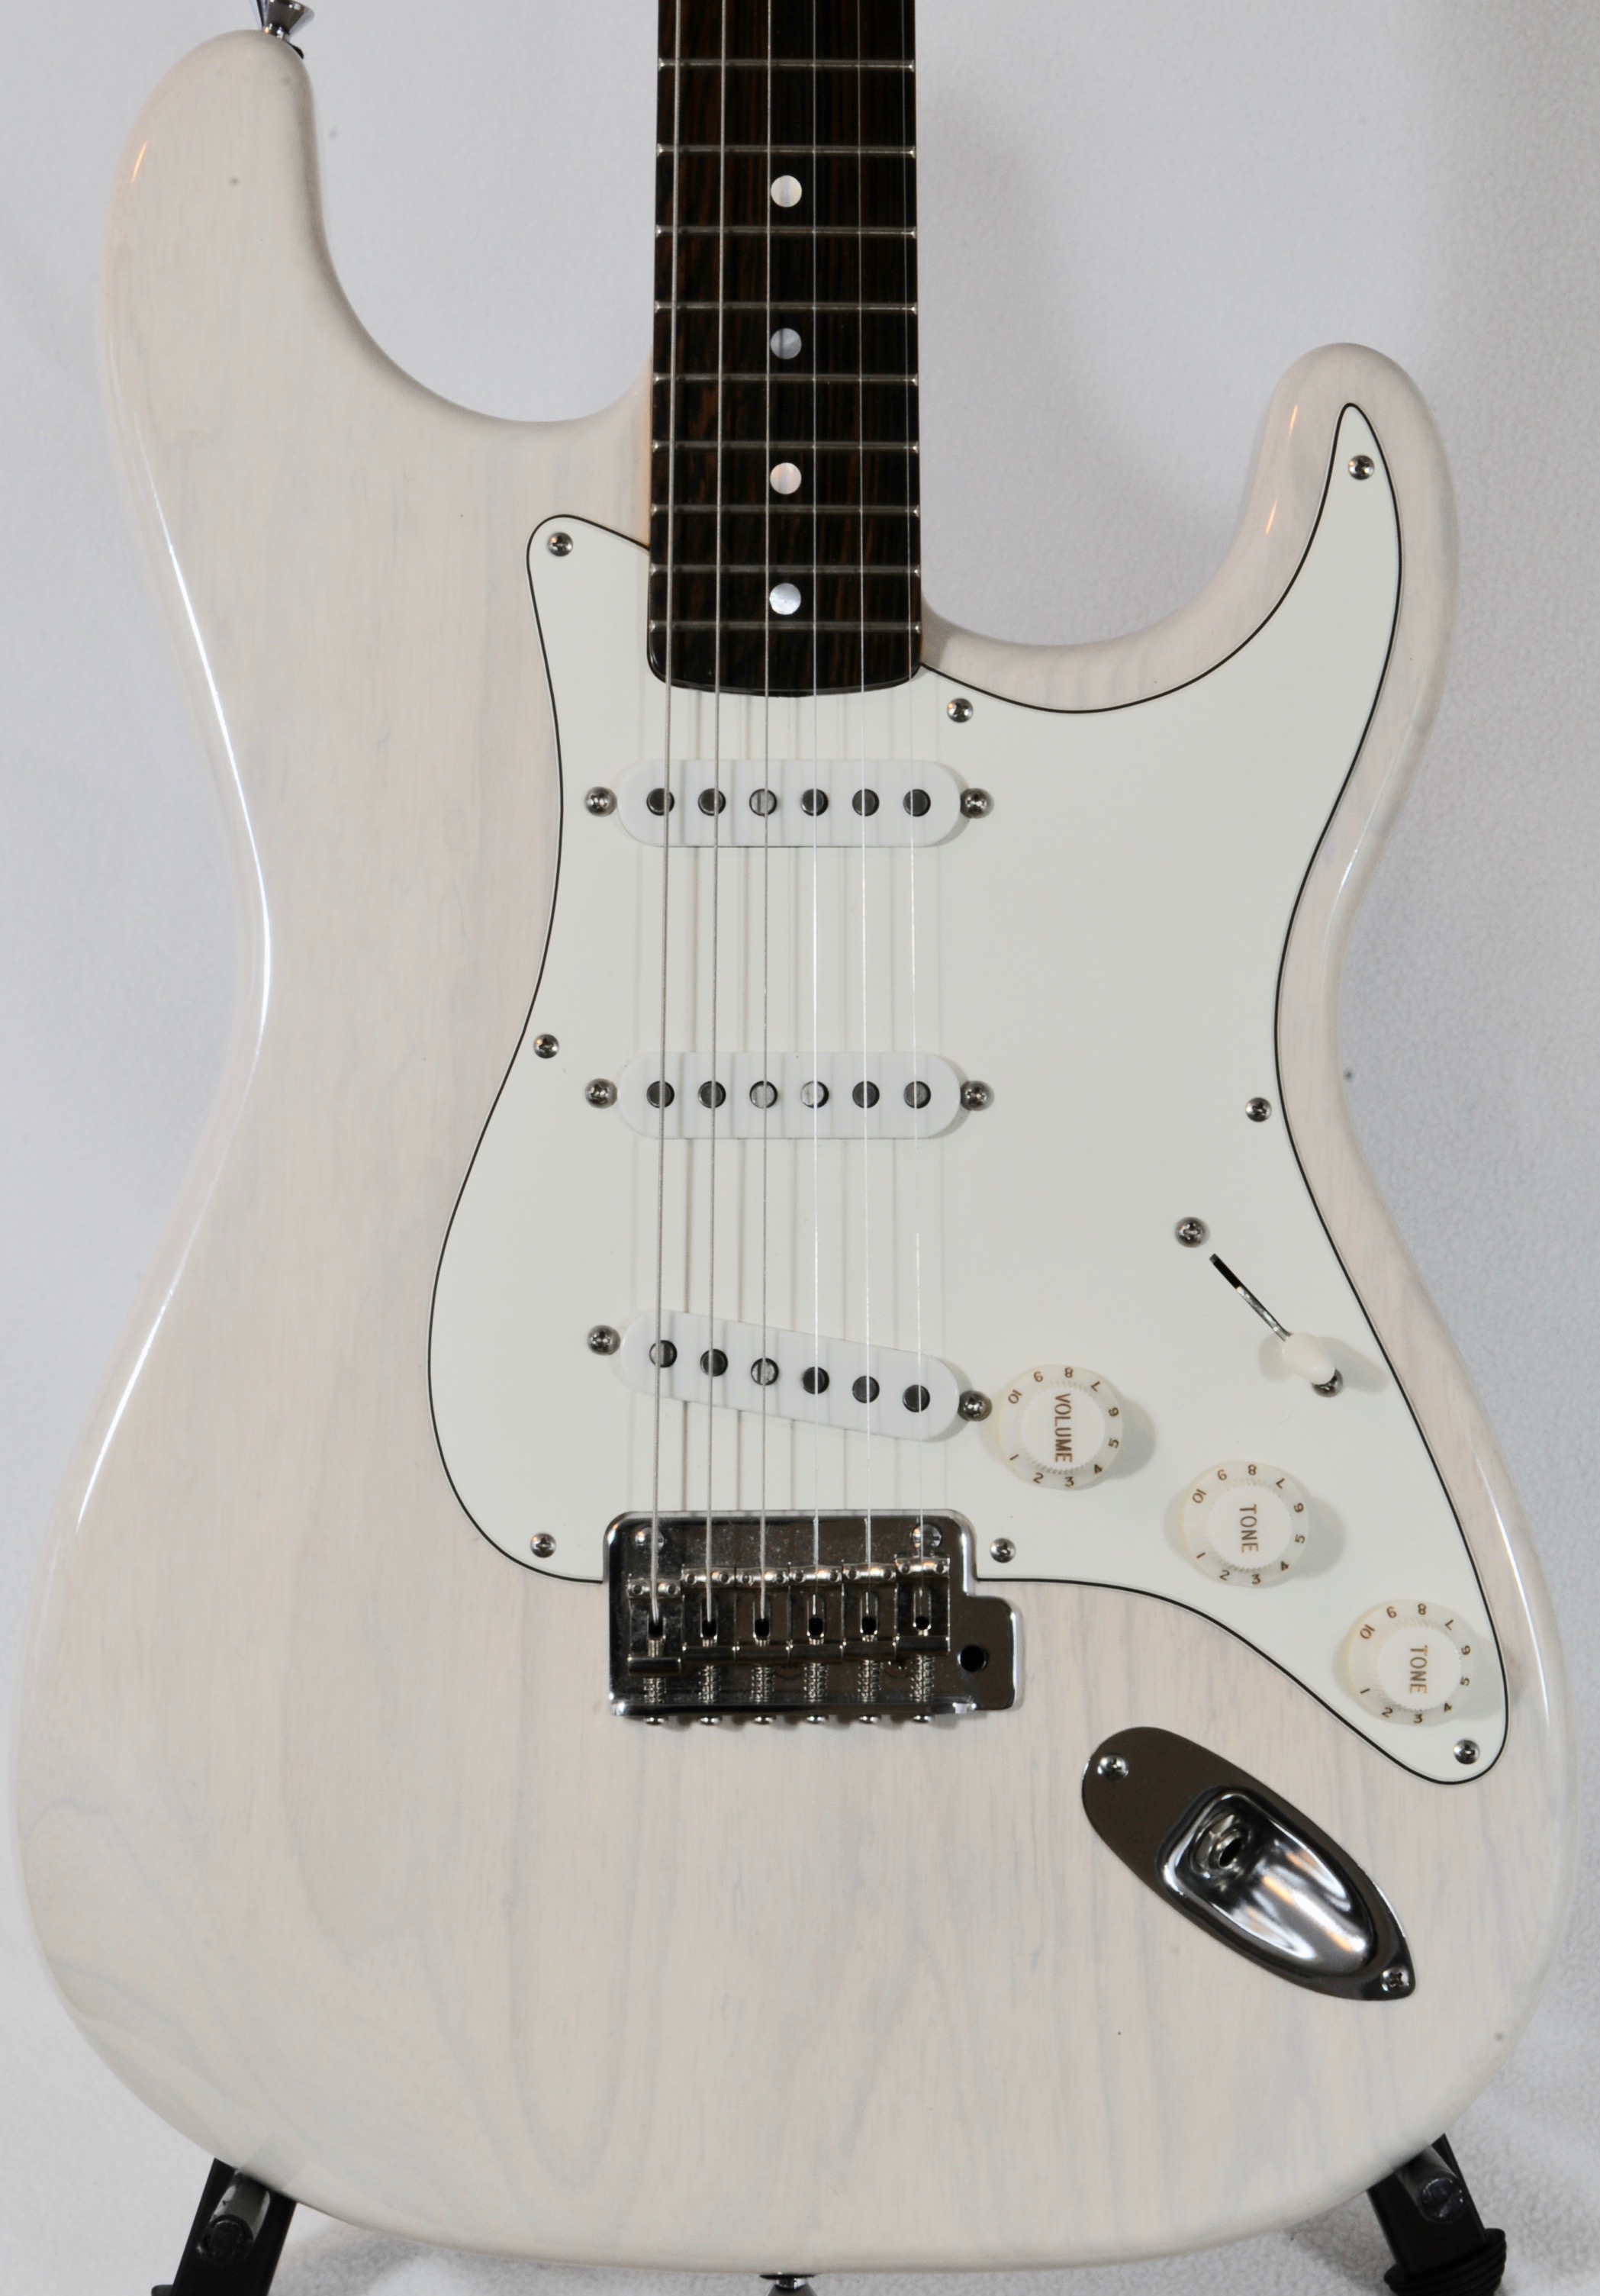 WYSOCKI  Strat – Hand Selected Old Growth Woods – Hand crafted